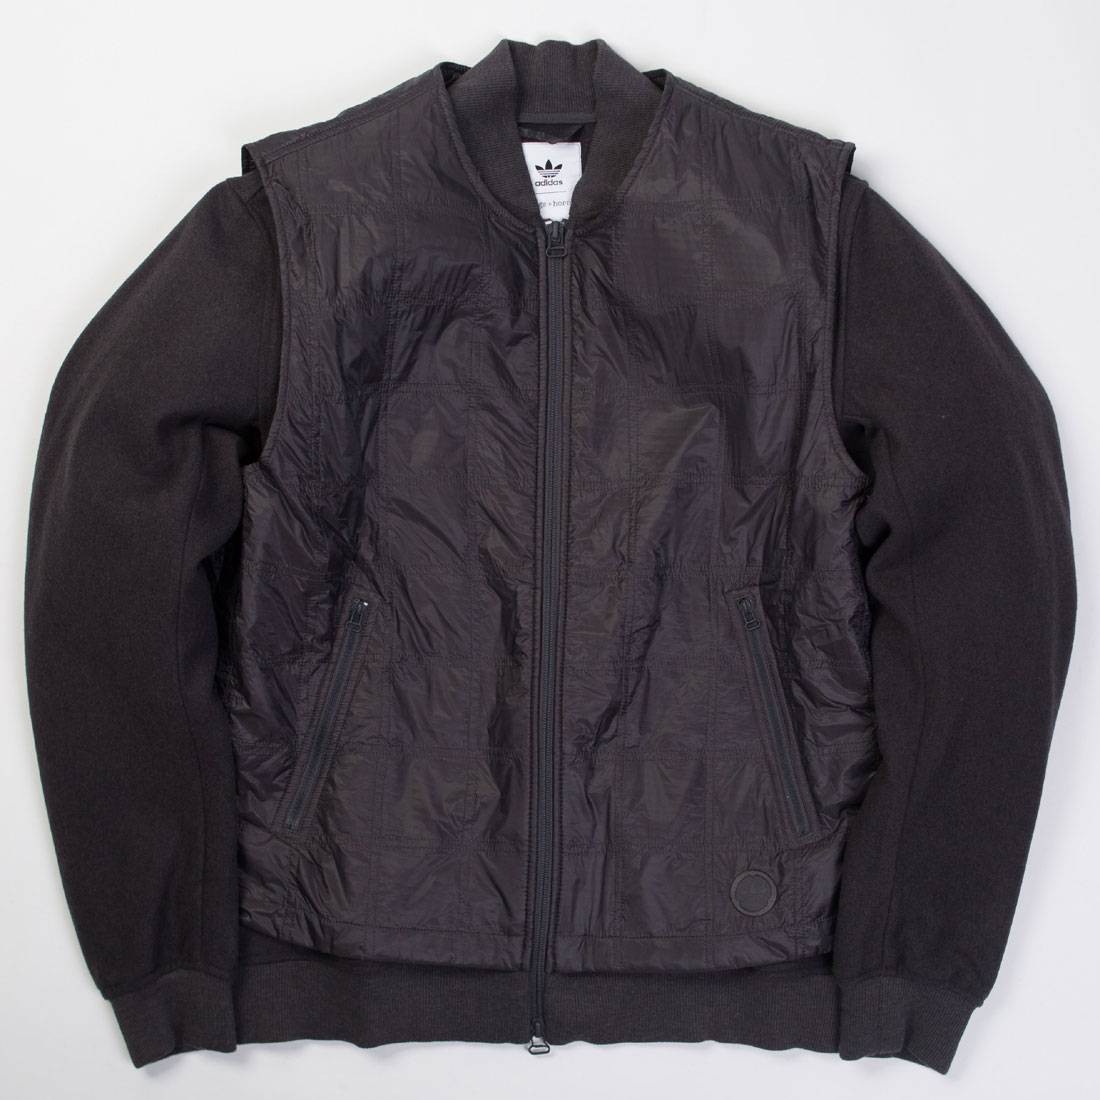 adidas wings and horns jacket